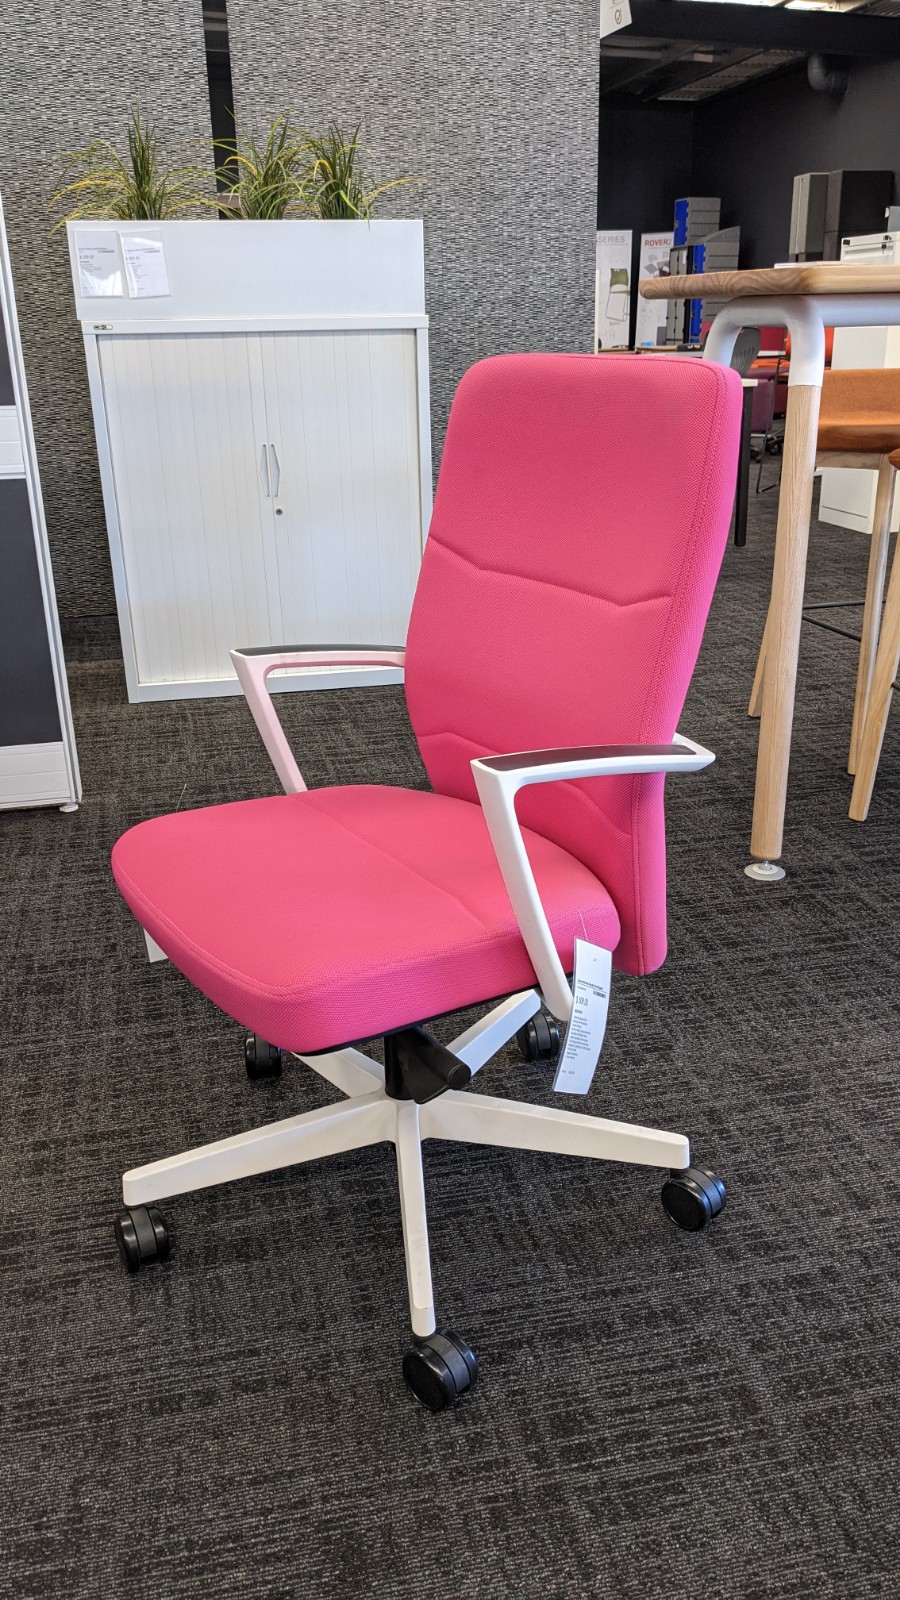 Essex Cantilever Visitor Chair